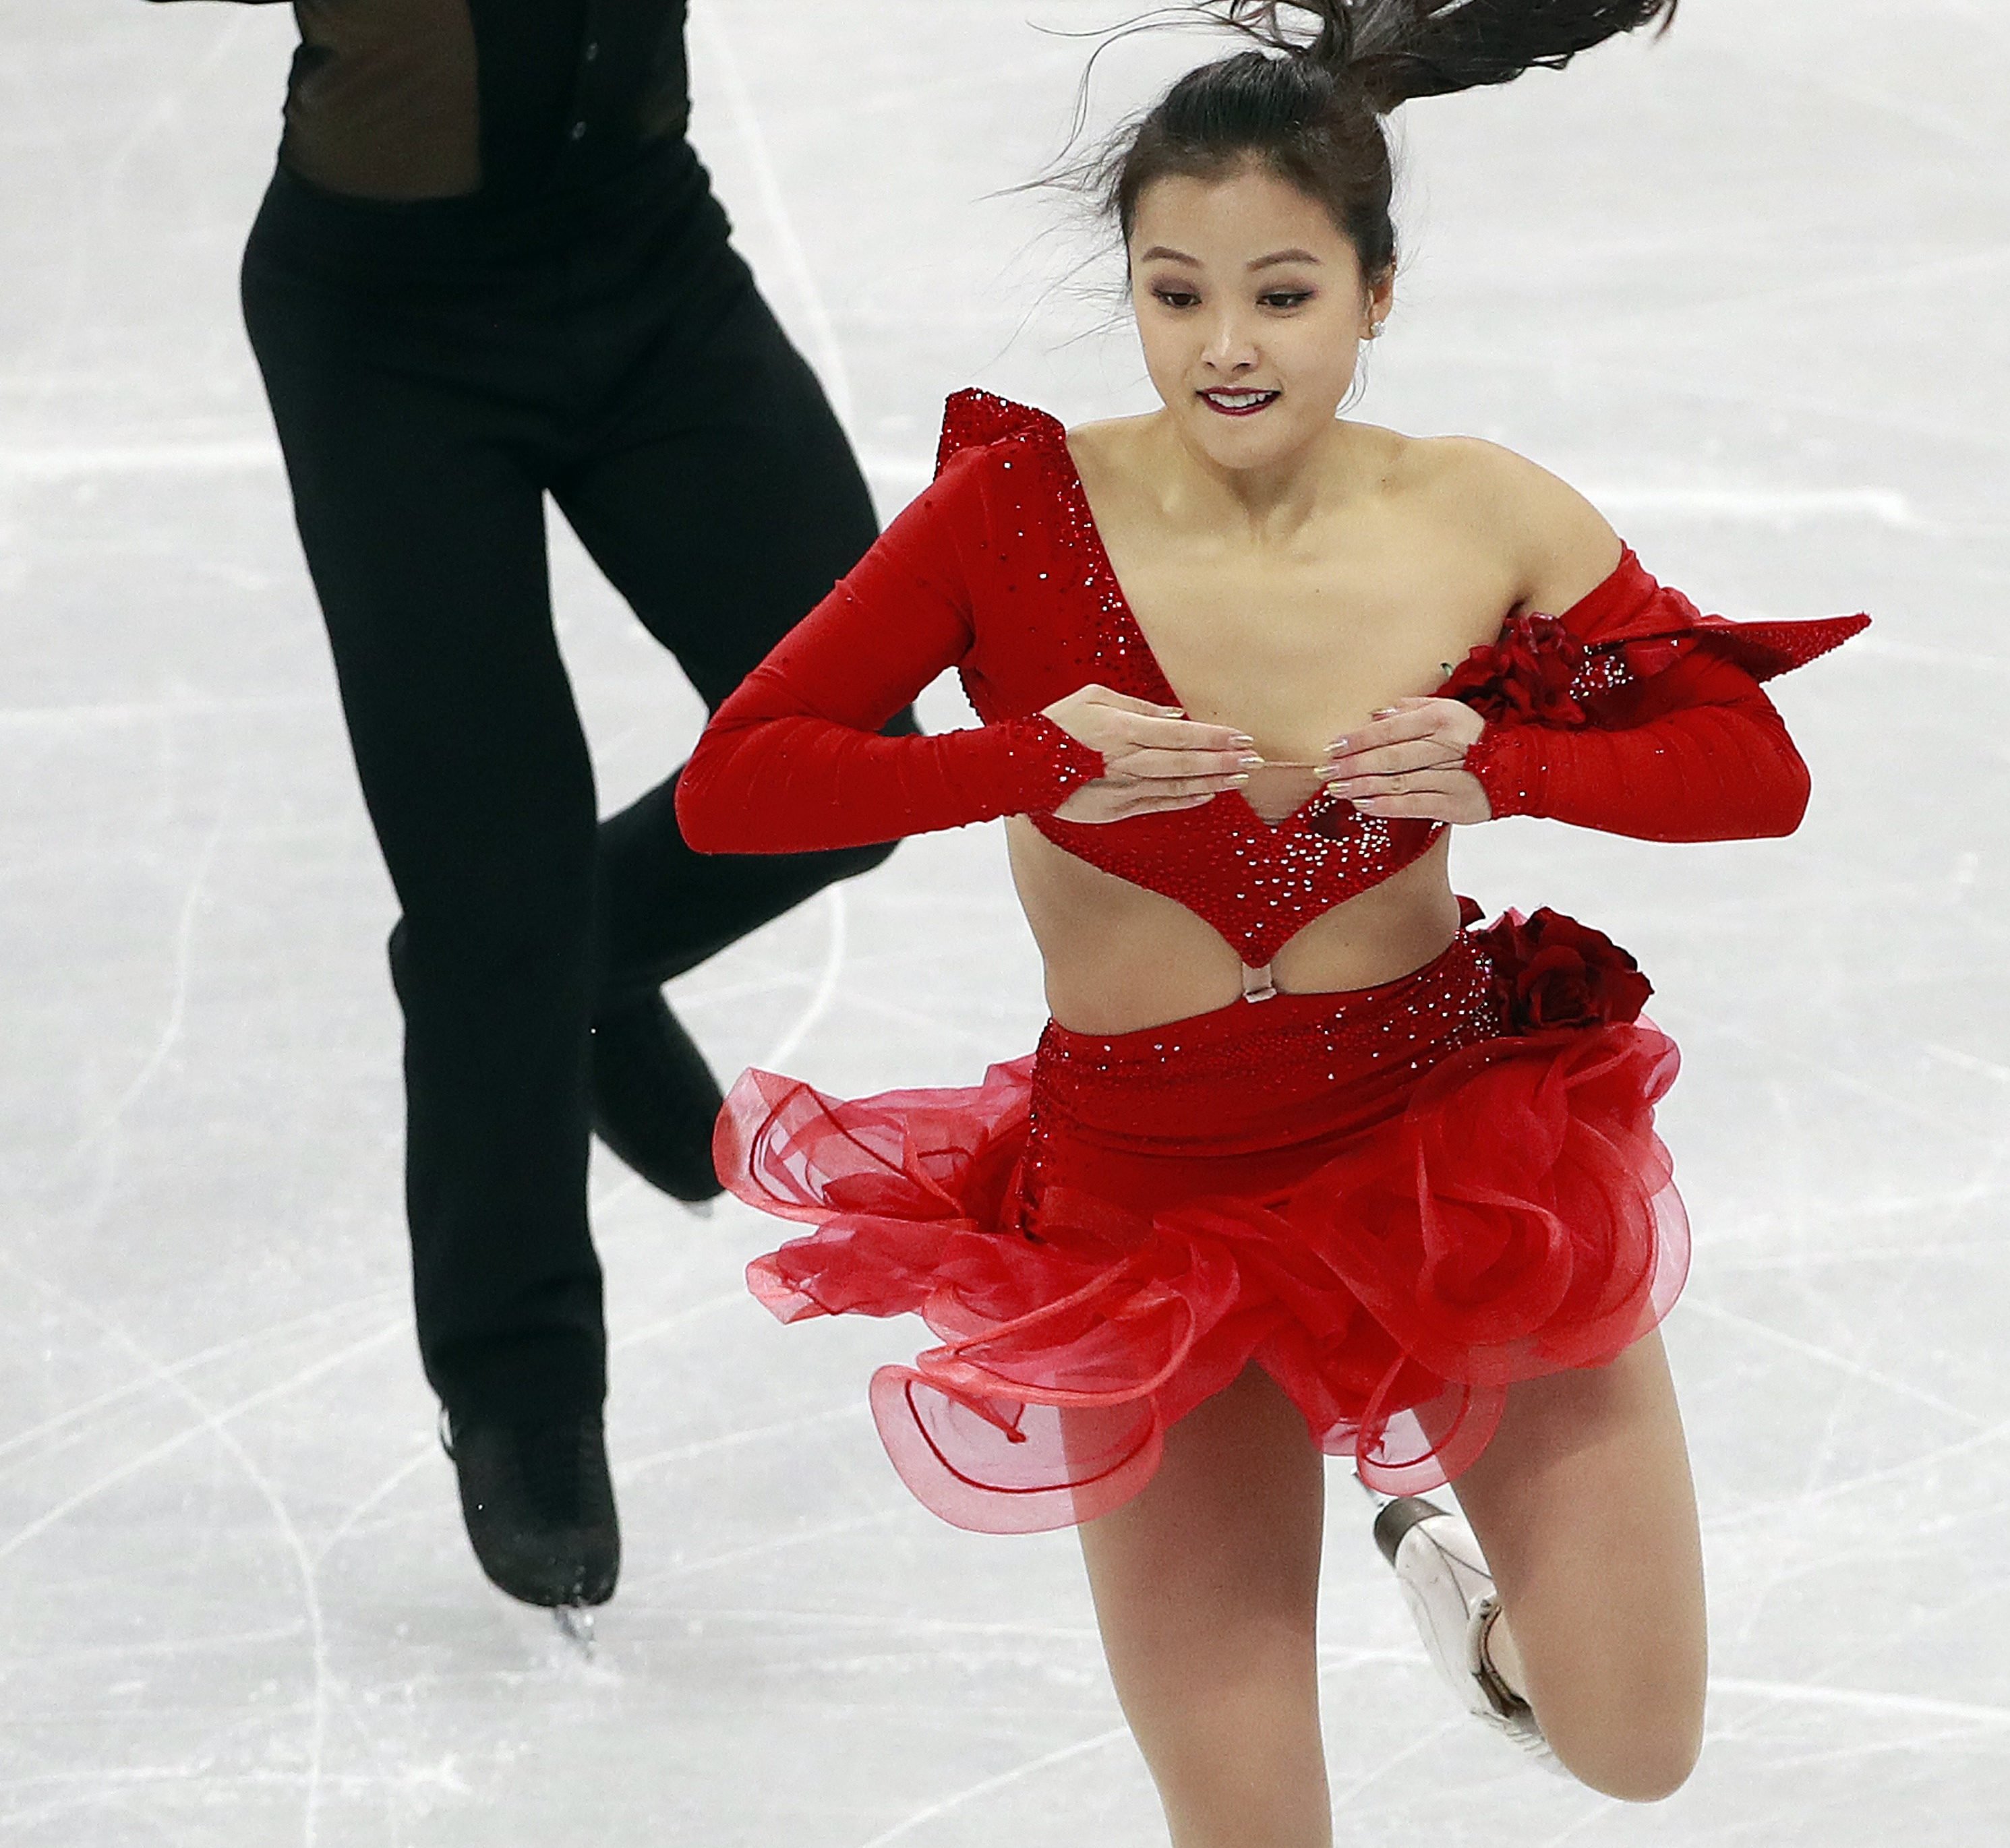 2018-02-11 10:09:10 epa06514007 Yura Min has part of her costume slide off her left shoulder after a clasp came undone (R) as she and Alexander Gamelin of South Korea compete during the Ice Dance Short Dance of the Figure Skating Team Event competition at the Gangneung Ice Arena during the PyeongChang 2018 Olympic Games, South Korea, 11 February 2018. EPA/HOW HWEE YOUNG